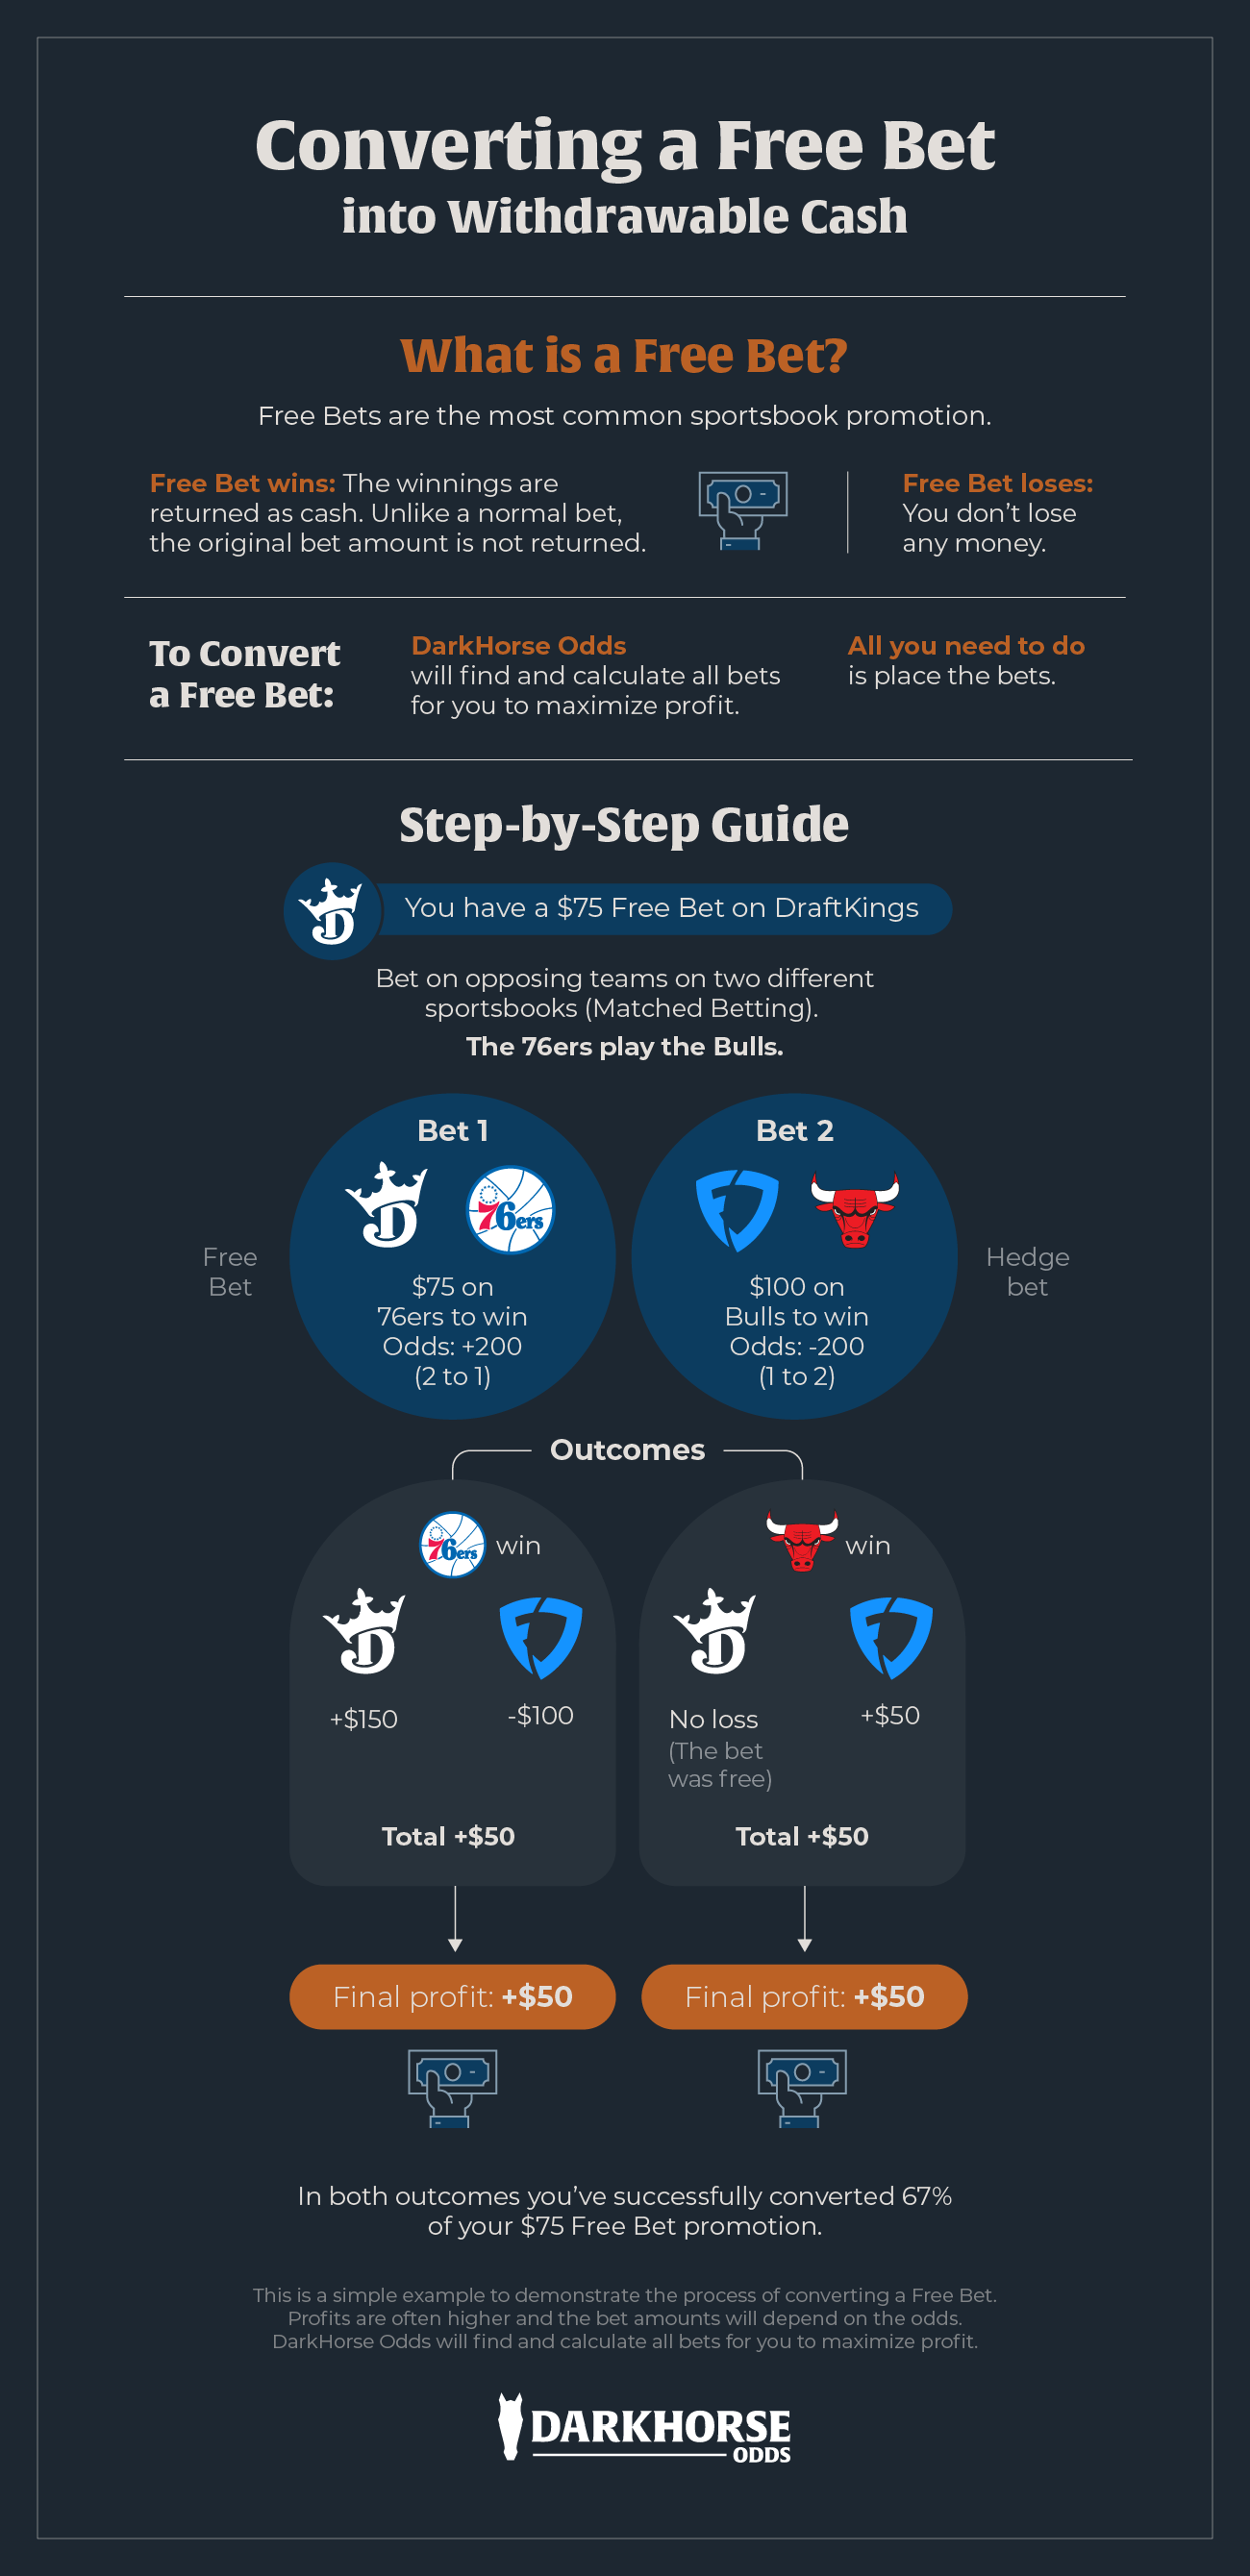 Infographic outlining how to convert a Free Bet